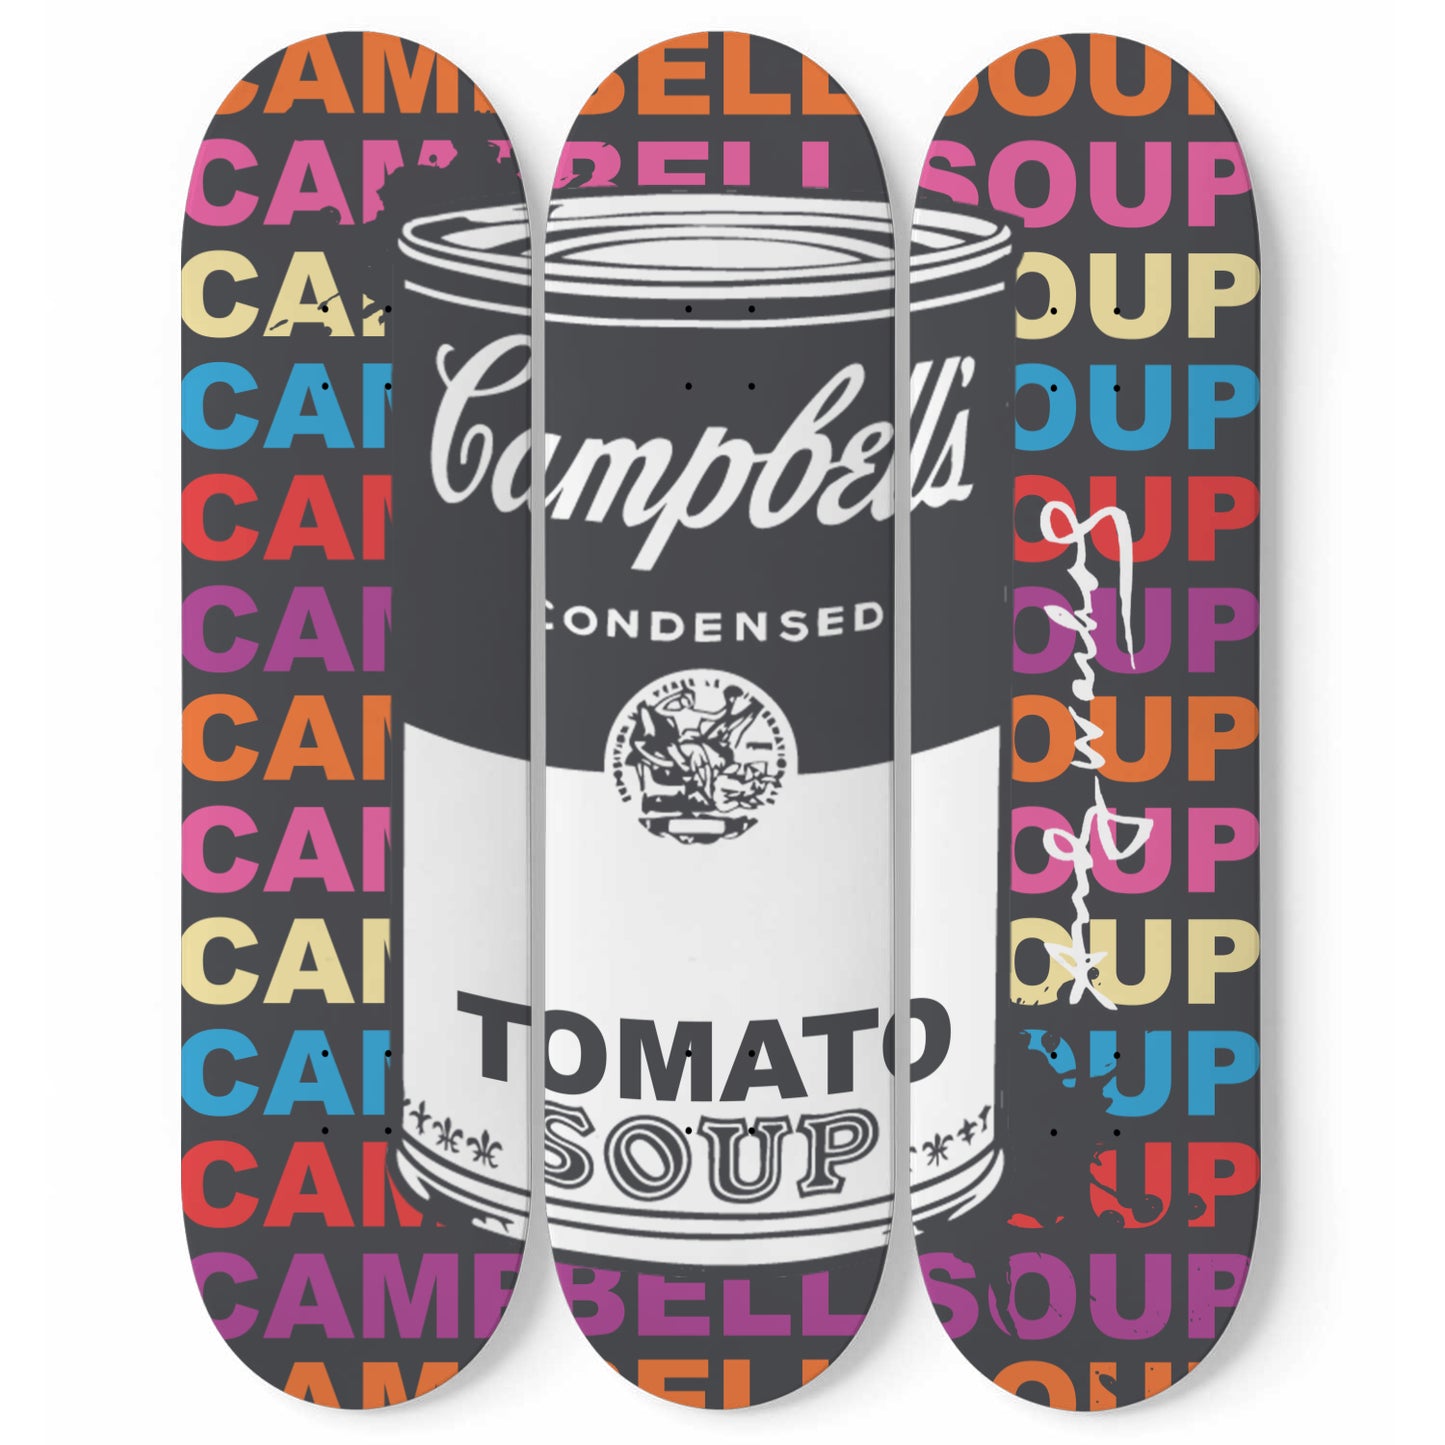 Andy Warhol Inspired - Campbell Soup | Colorful Letters - 3-piece Skateboard Wall Art | Aesthetic Vintage Style Wall Art | Inspired Art